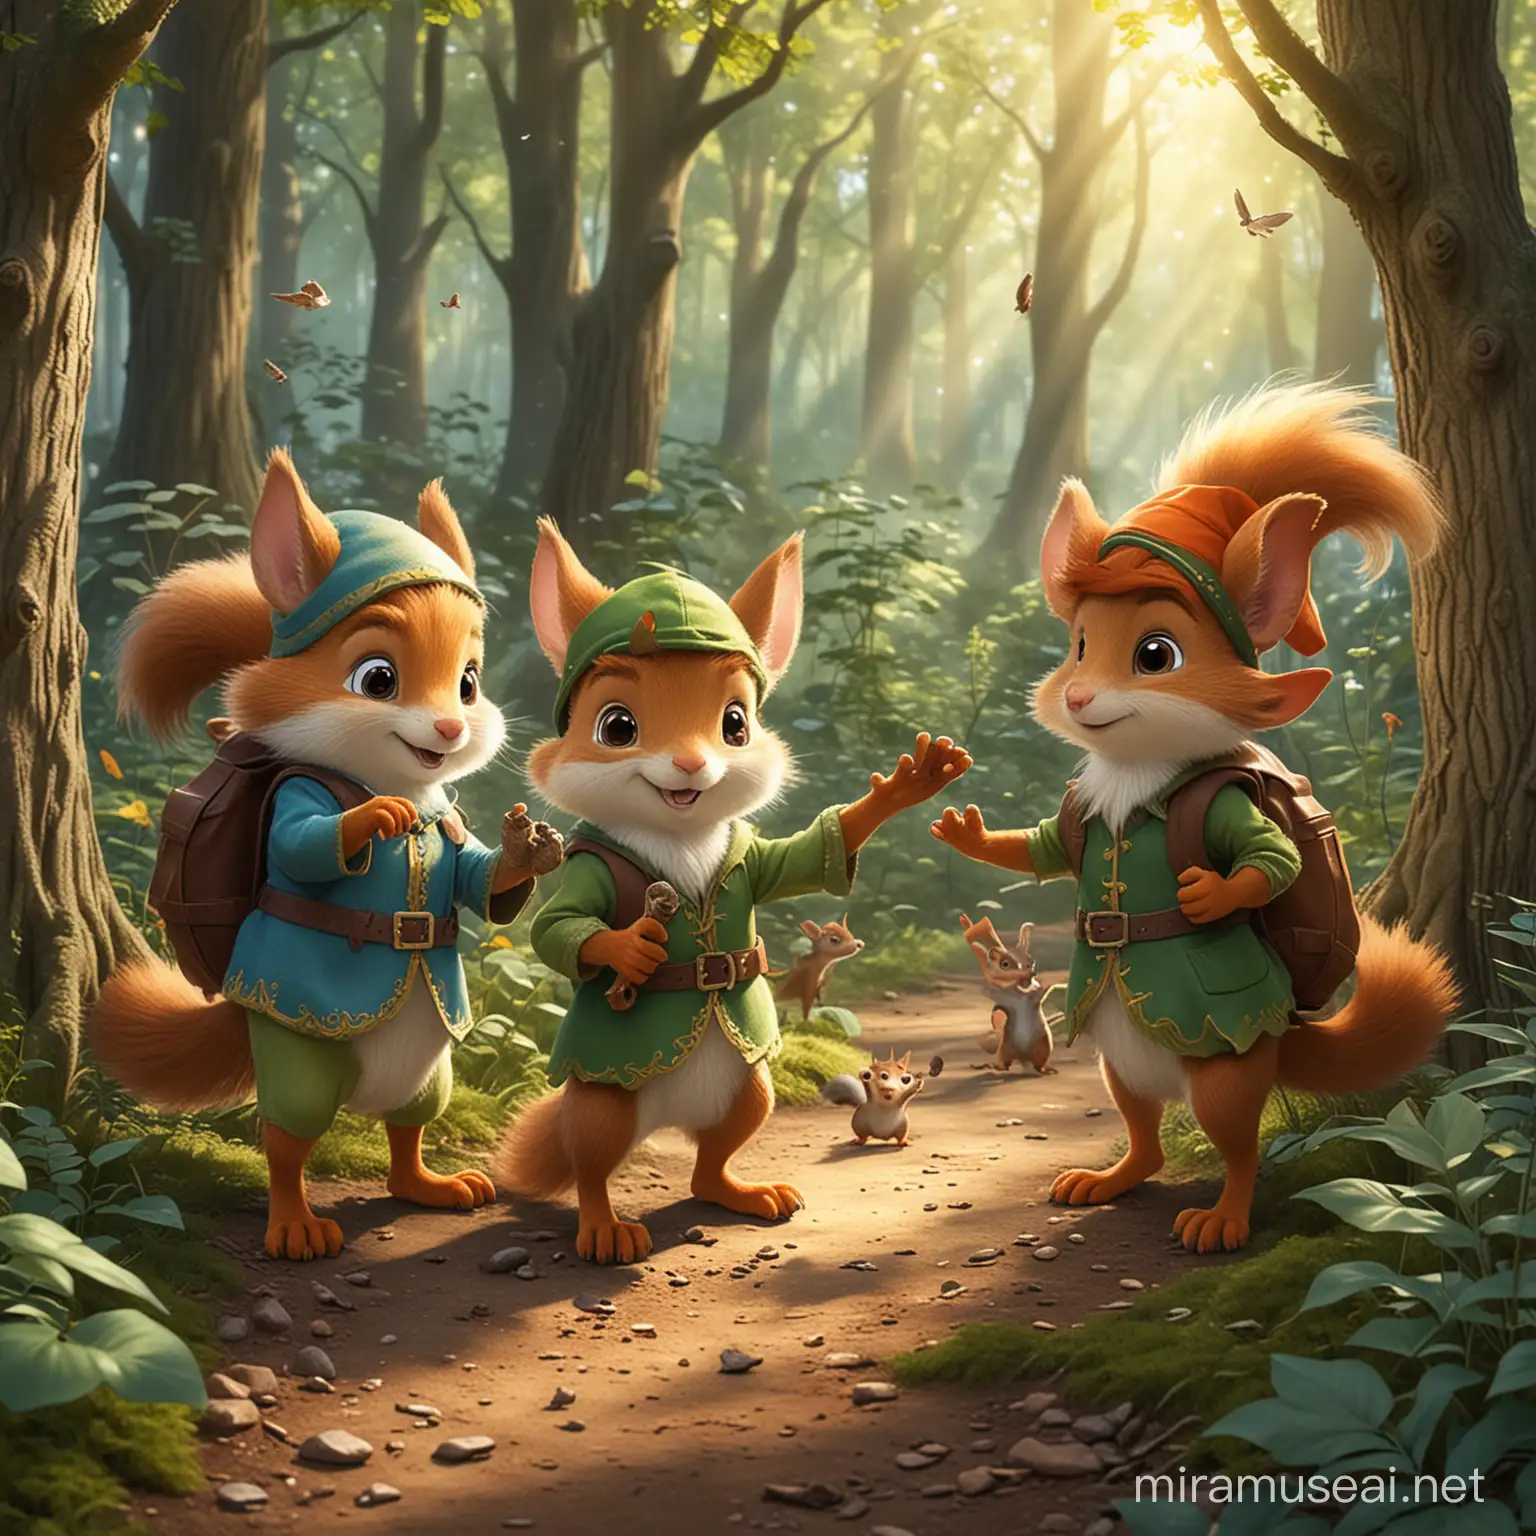 Illustrate a heartwarming scene for the first chapter of the children's storybook 'Magical Forest Friends'. The scene depicts a group of adorable elves discovering a lost squirrel in the deep forest. They are extending a helping hand to guide the squirrel back home, surrounded by vibrant trees and cheerful sunlight. The atmosphere should convey feelings of kindness, empathy, and camaraderie.